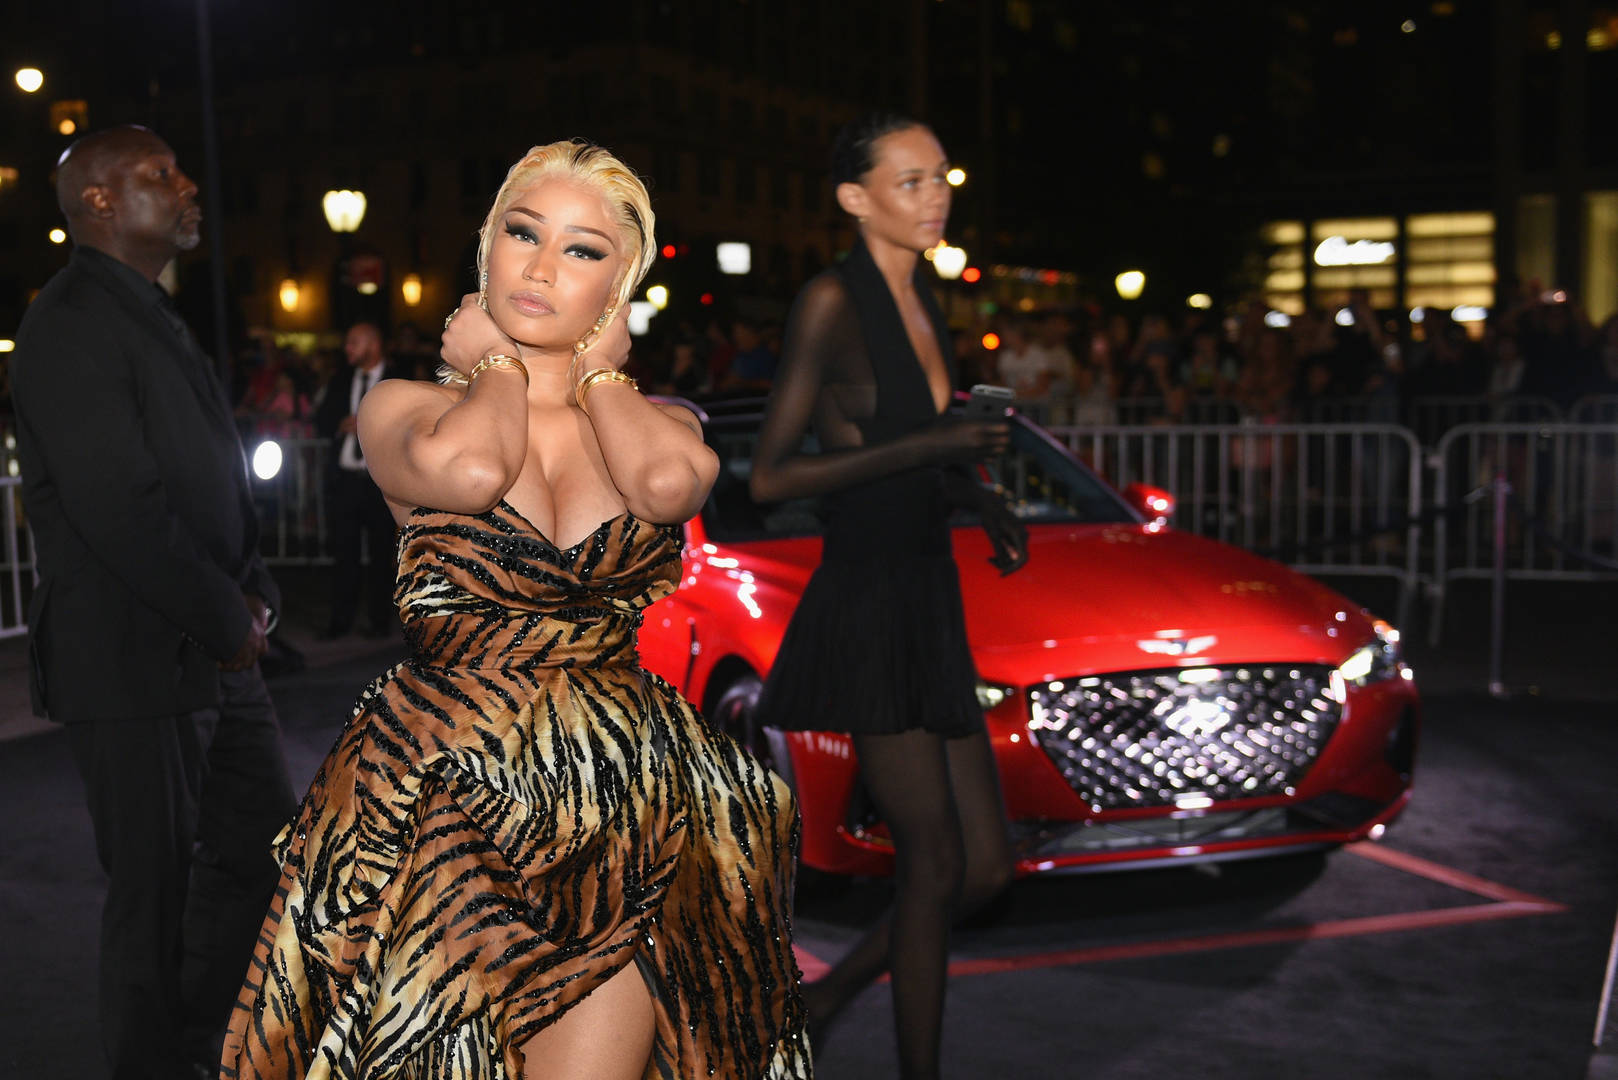 Nicki Minaj Sues Her Stylist For Intentionally Spoiling Her Outfit Because She Owes Her Stylist $250k